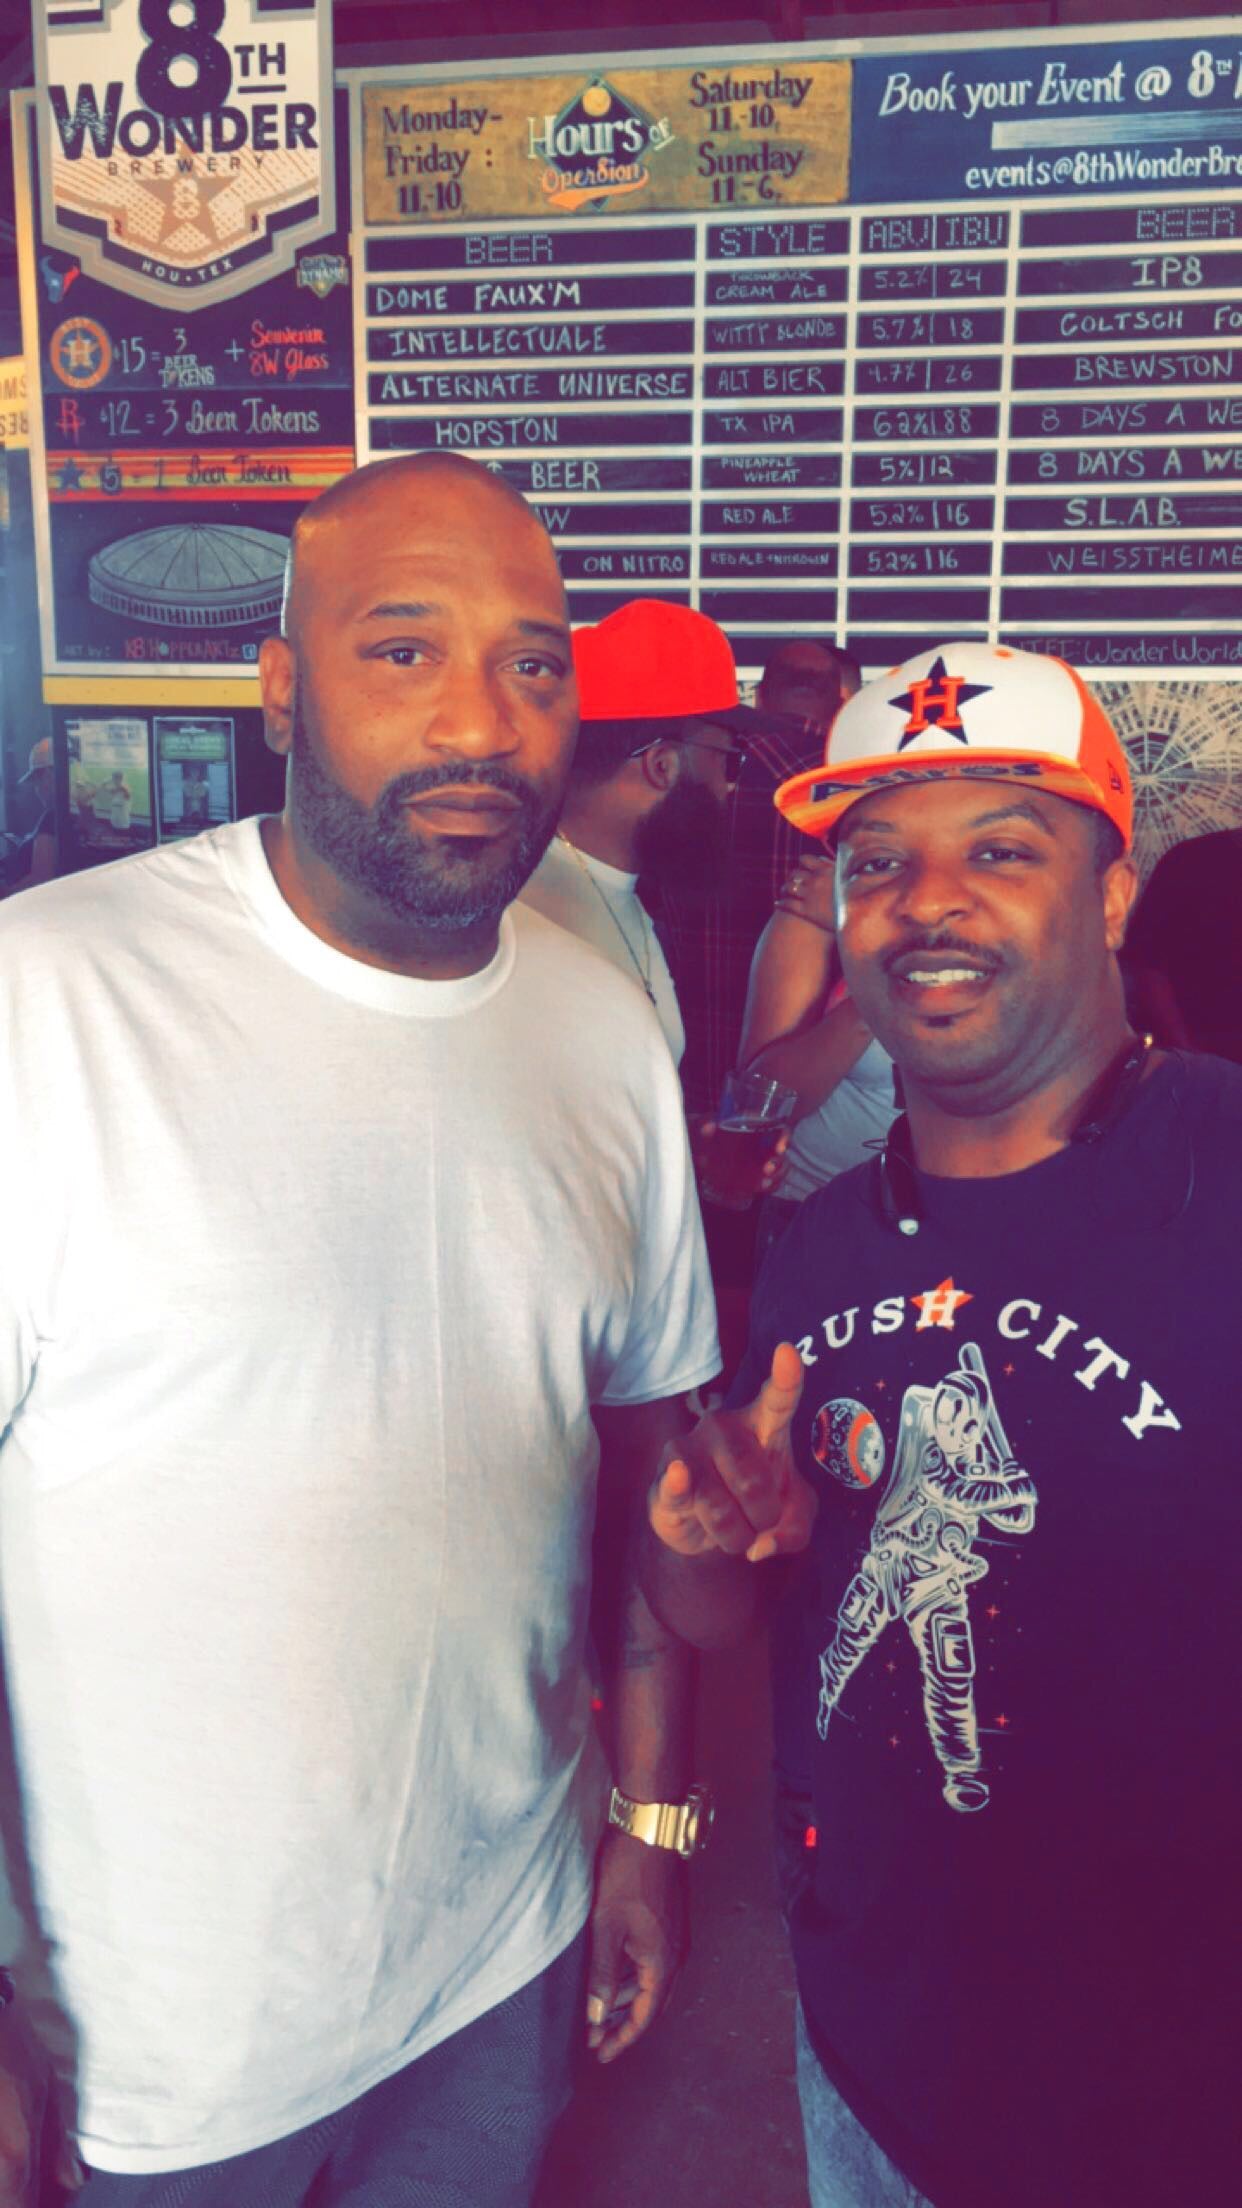 Houston rapper, Bun B, takes a picture with Diverscity clothing co owner, Adonis Alexander, wearing the HTX baseball tee.